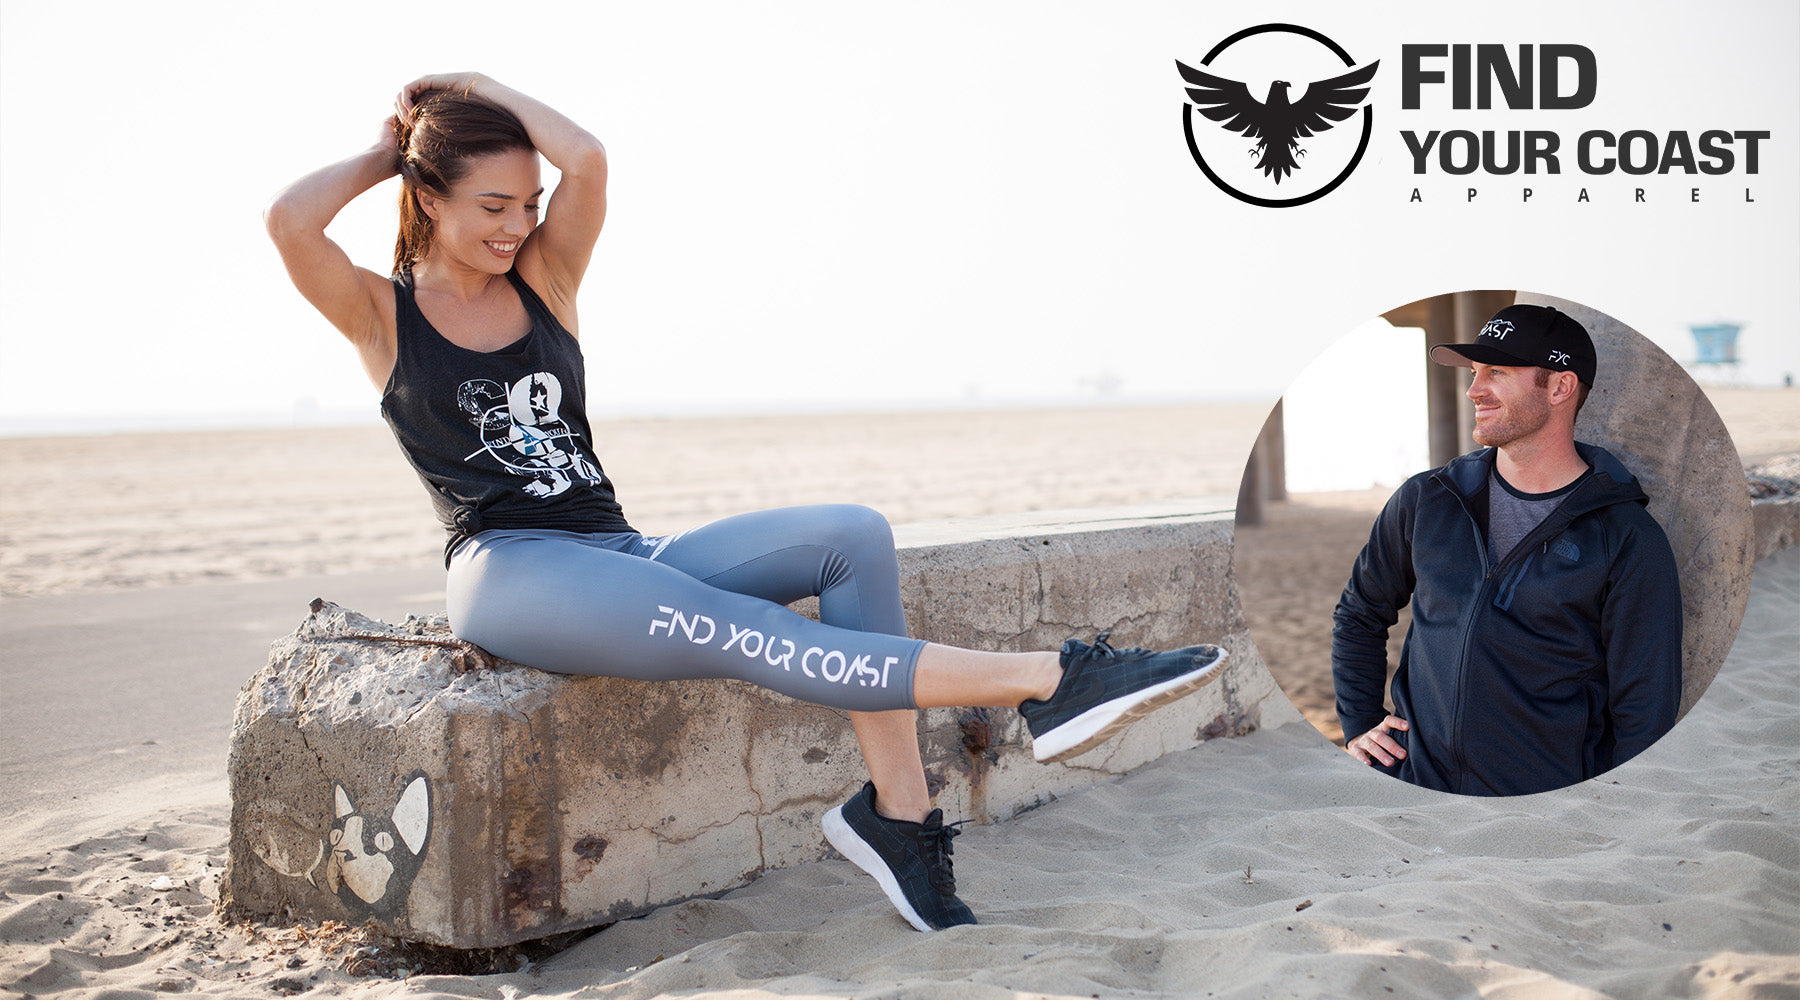 Find Your Coast Apparel from Southern California